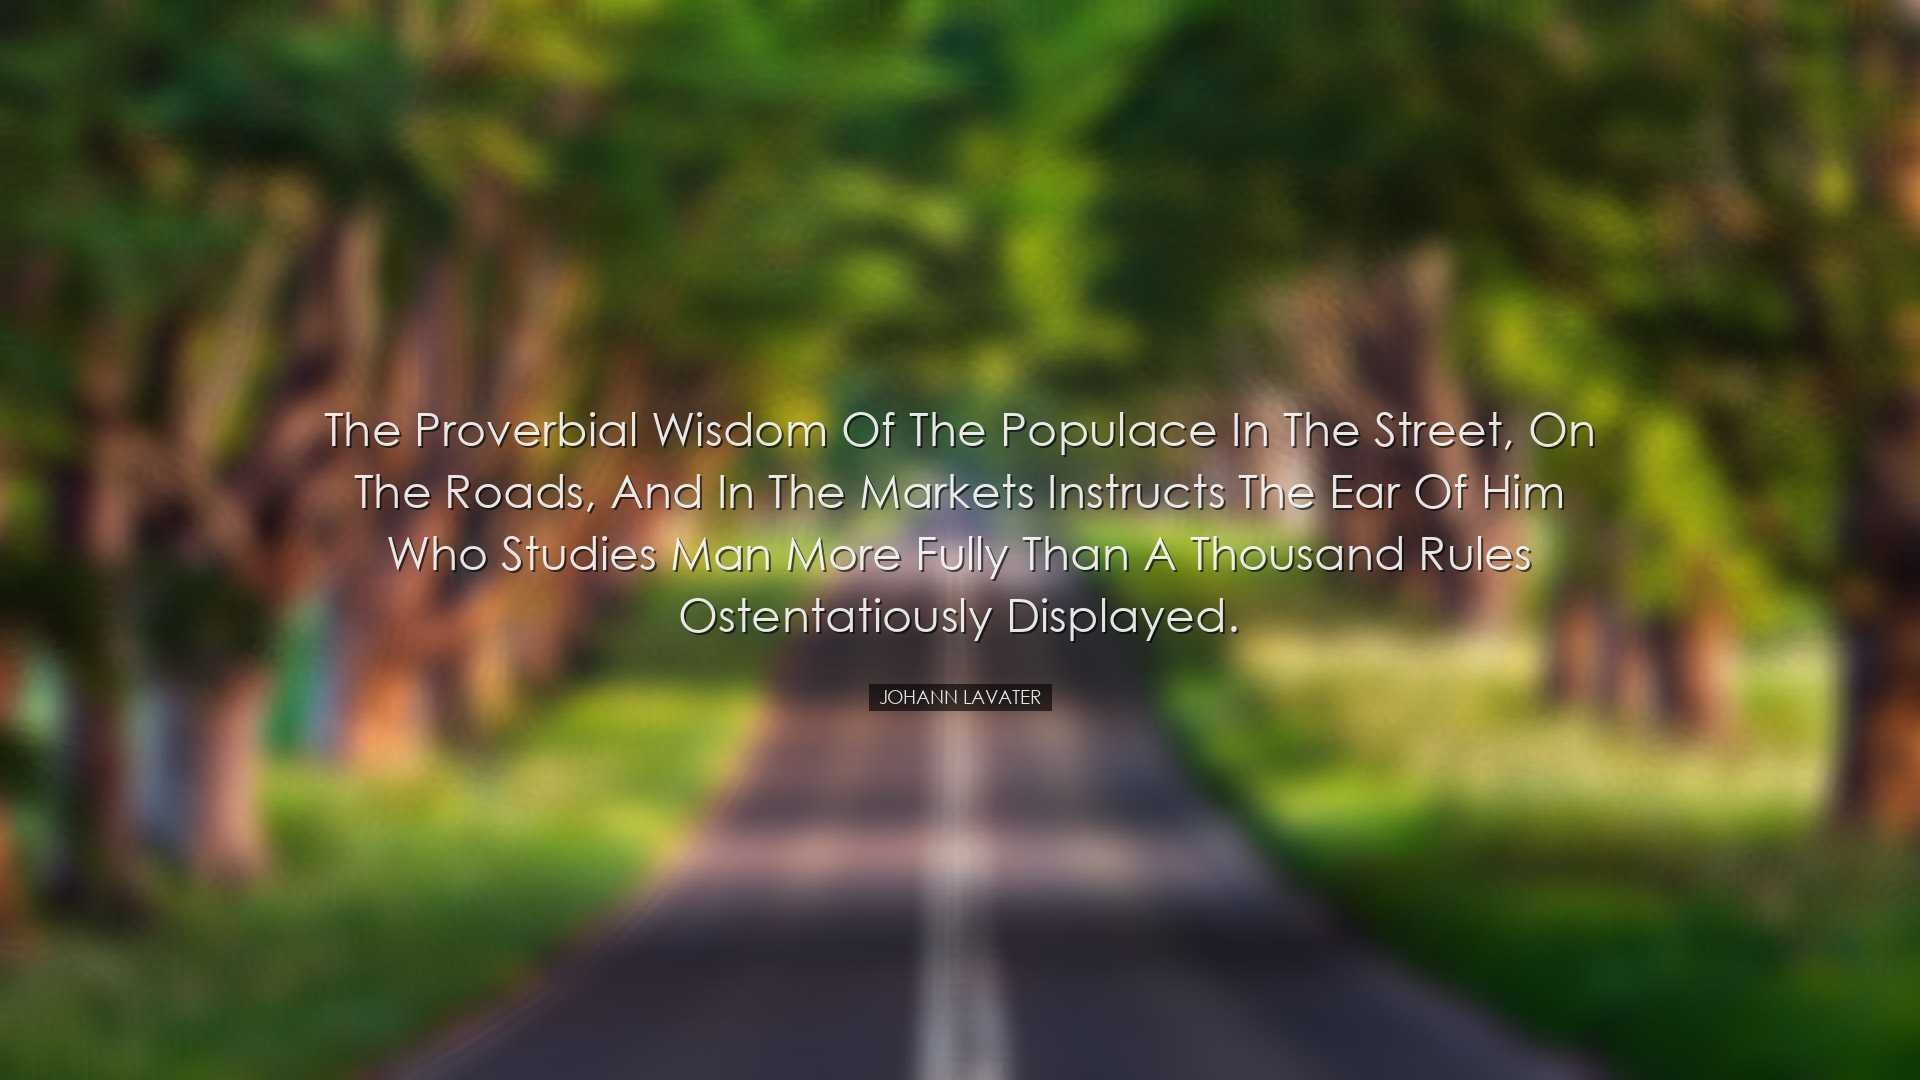 The proverbial wisdom of the populace in the street, on the roads,